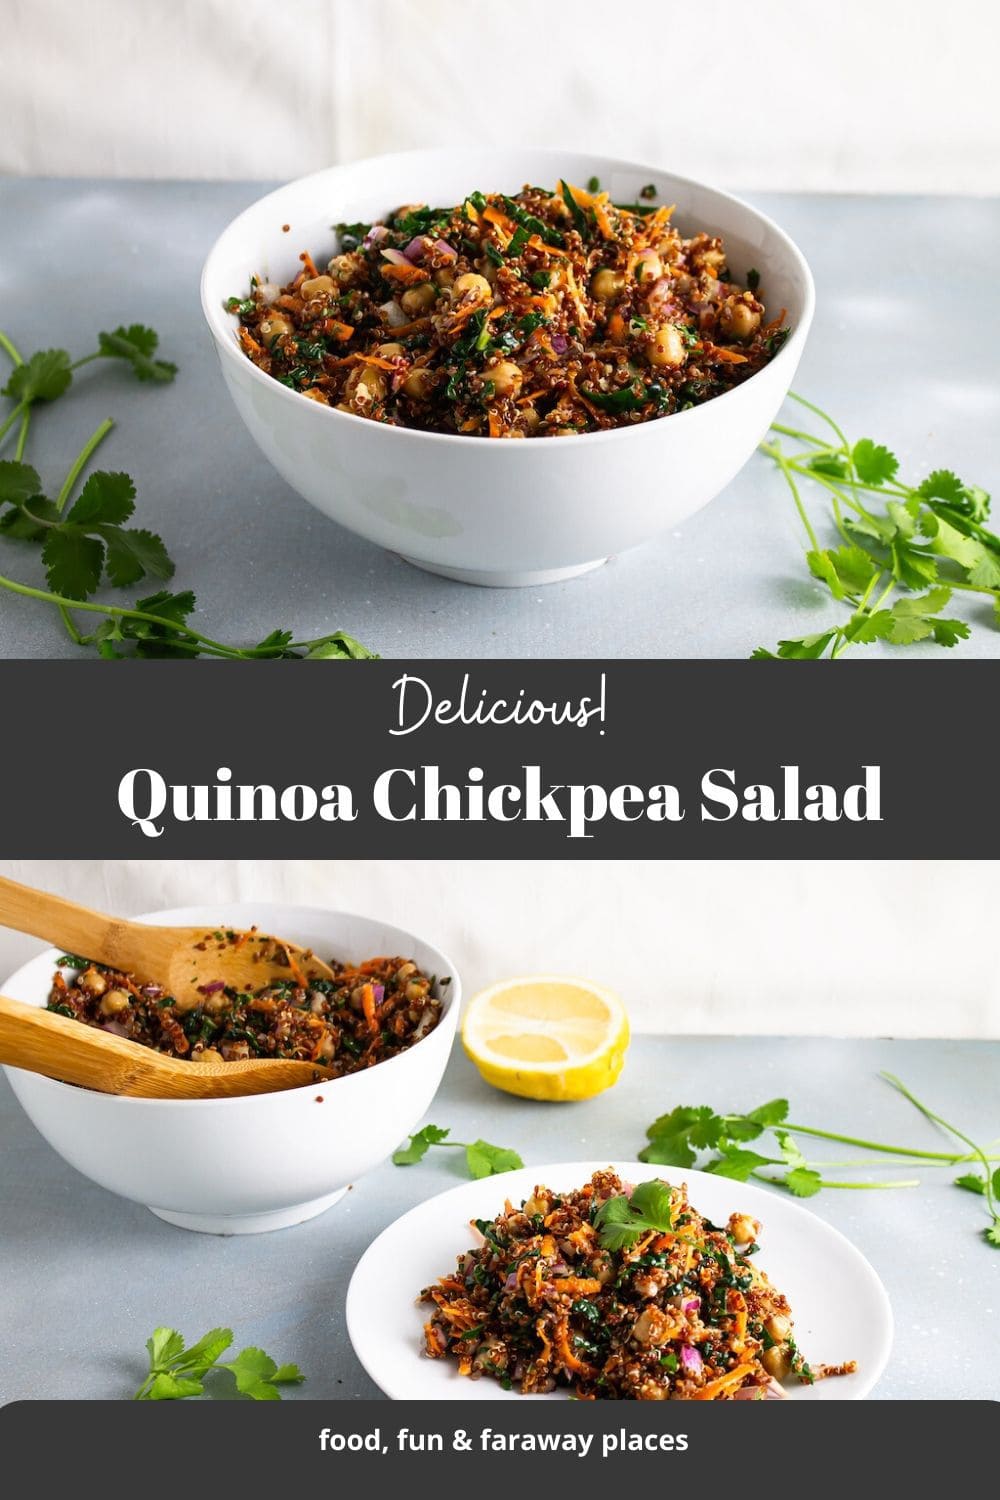 This Quinoa Chickpea Salad recipe is the perfect side when you want something light to accompany a steak, roasted chicken, or fish. This also makes a wonderful meal all on its own. 